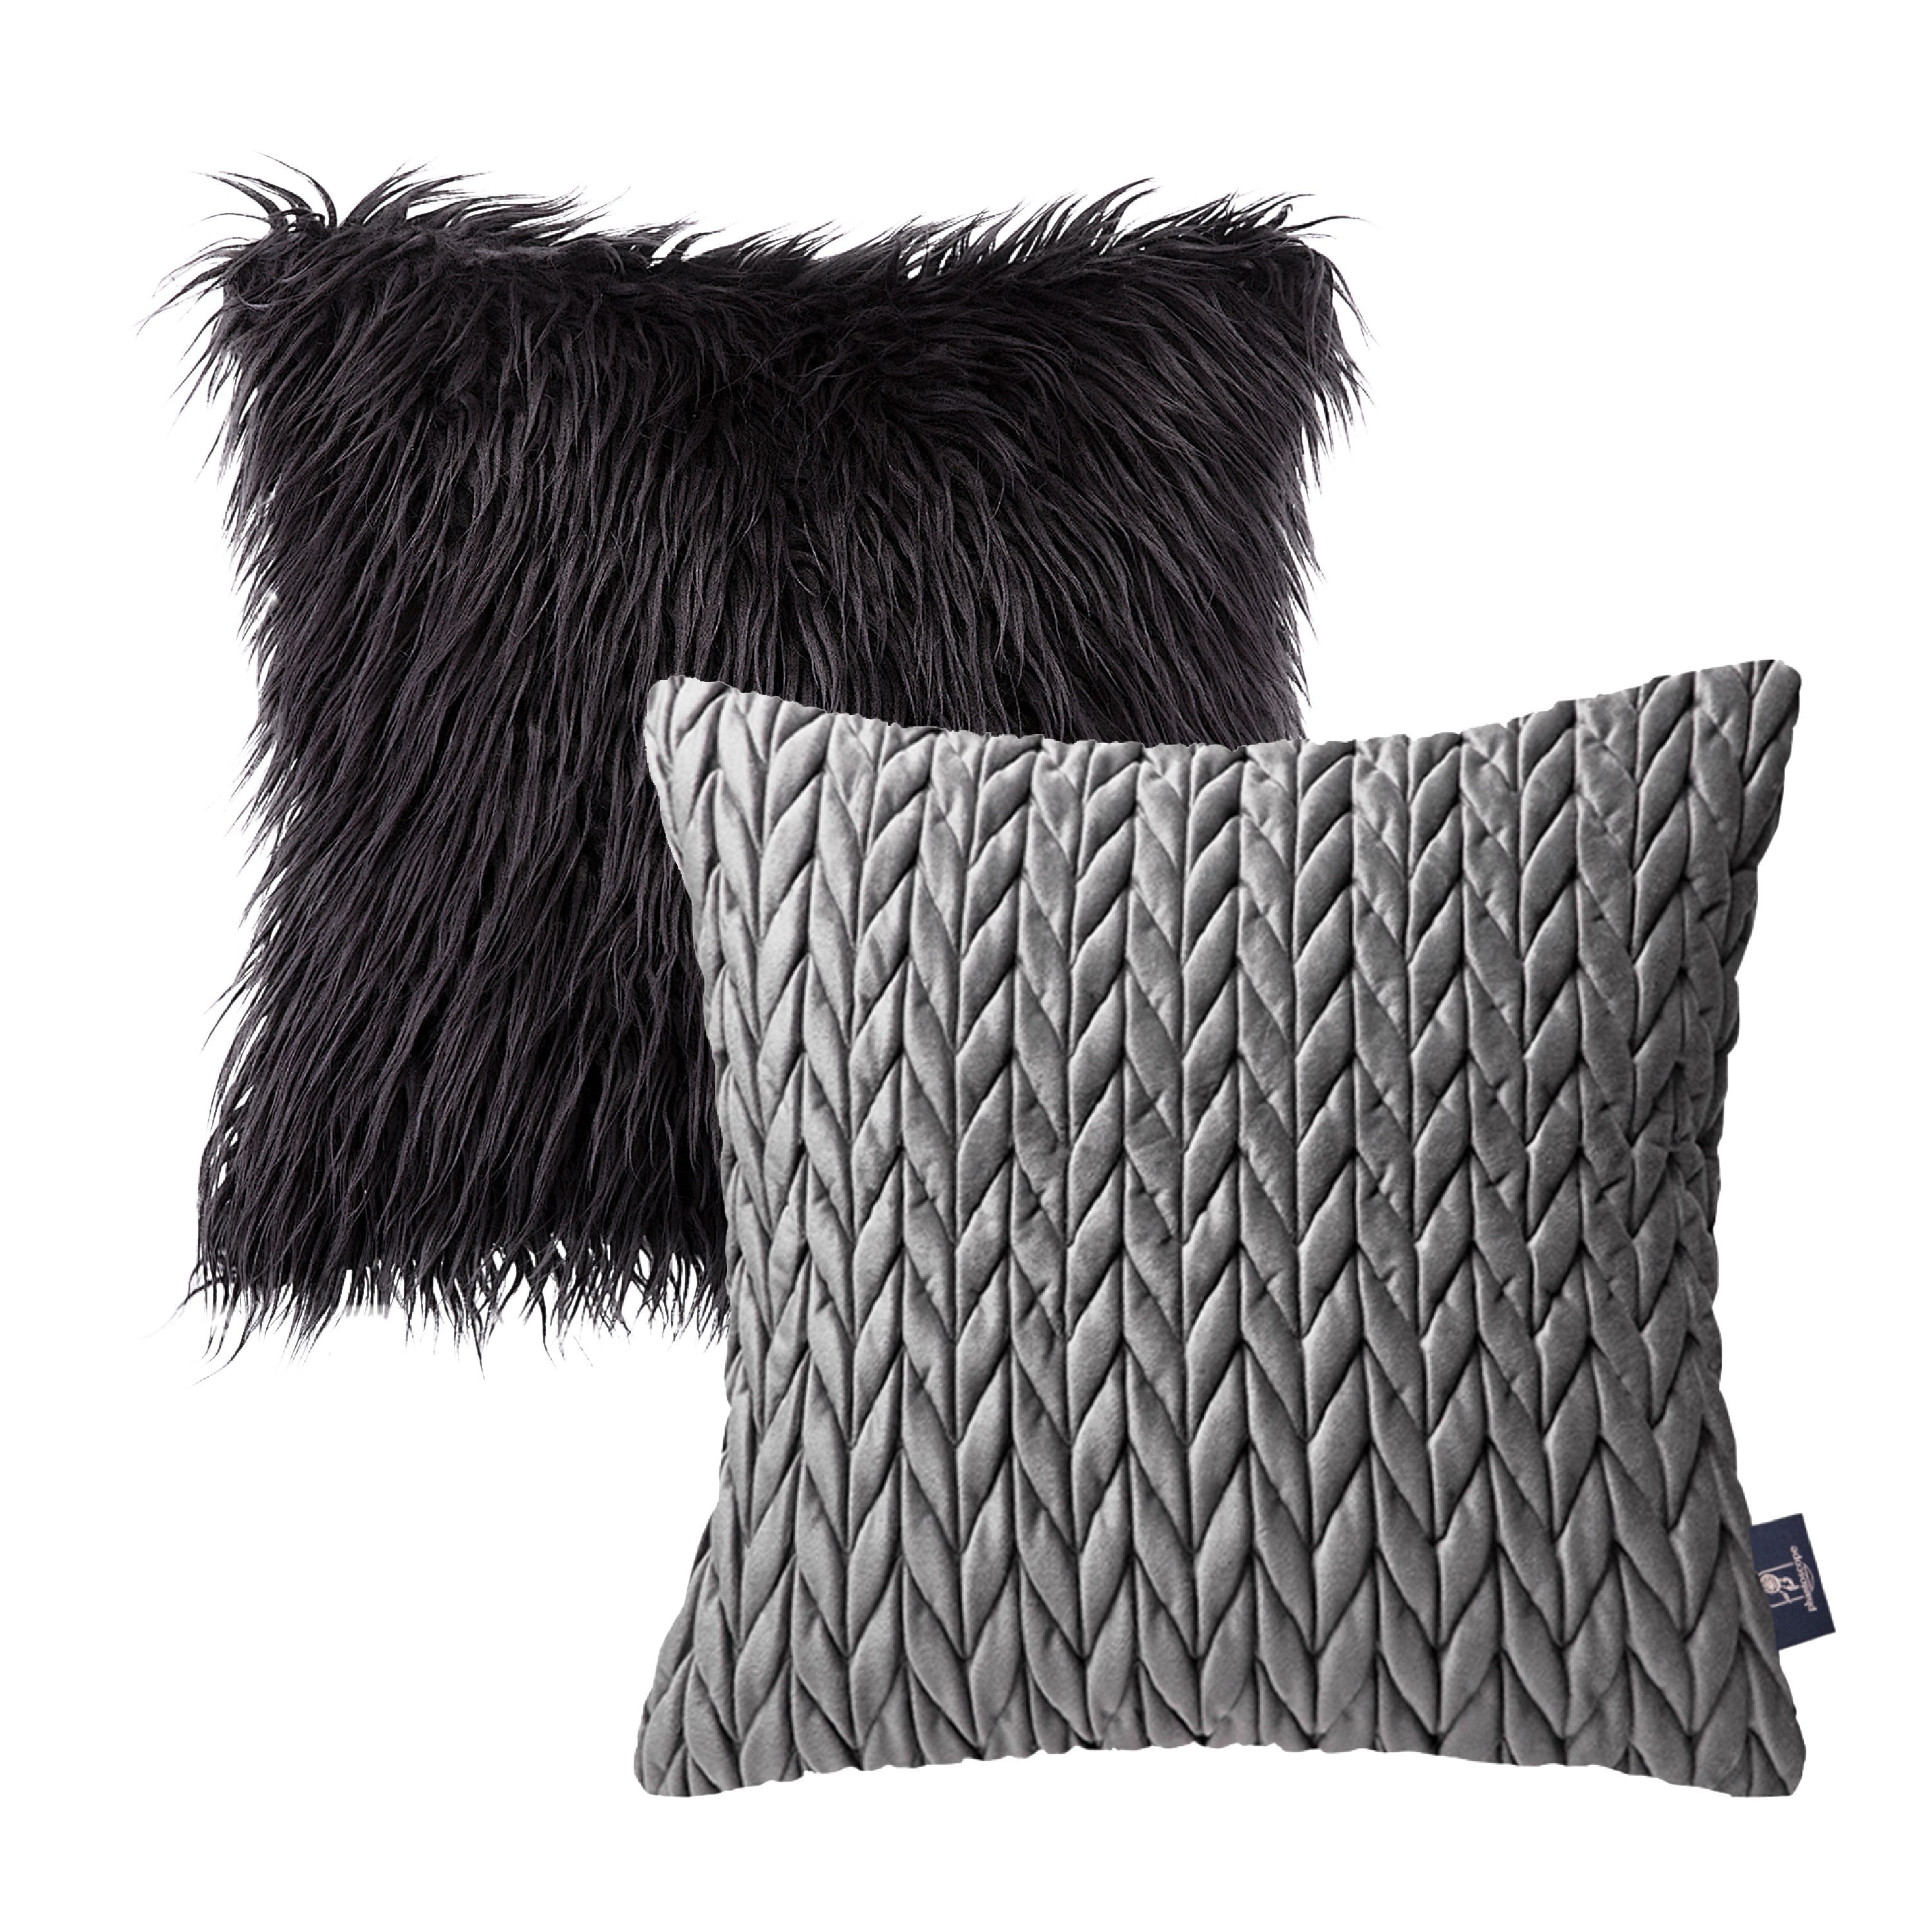 Phantoscope Designer's Choice Decorative Throw Pillow Set, Fluffy Faux Fur & Quilted Velvet Bundle, for Sofa Couch Bedroom, 18 inch x 18 inch, Black